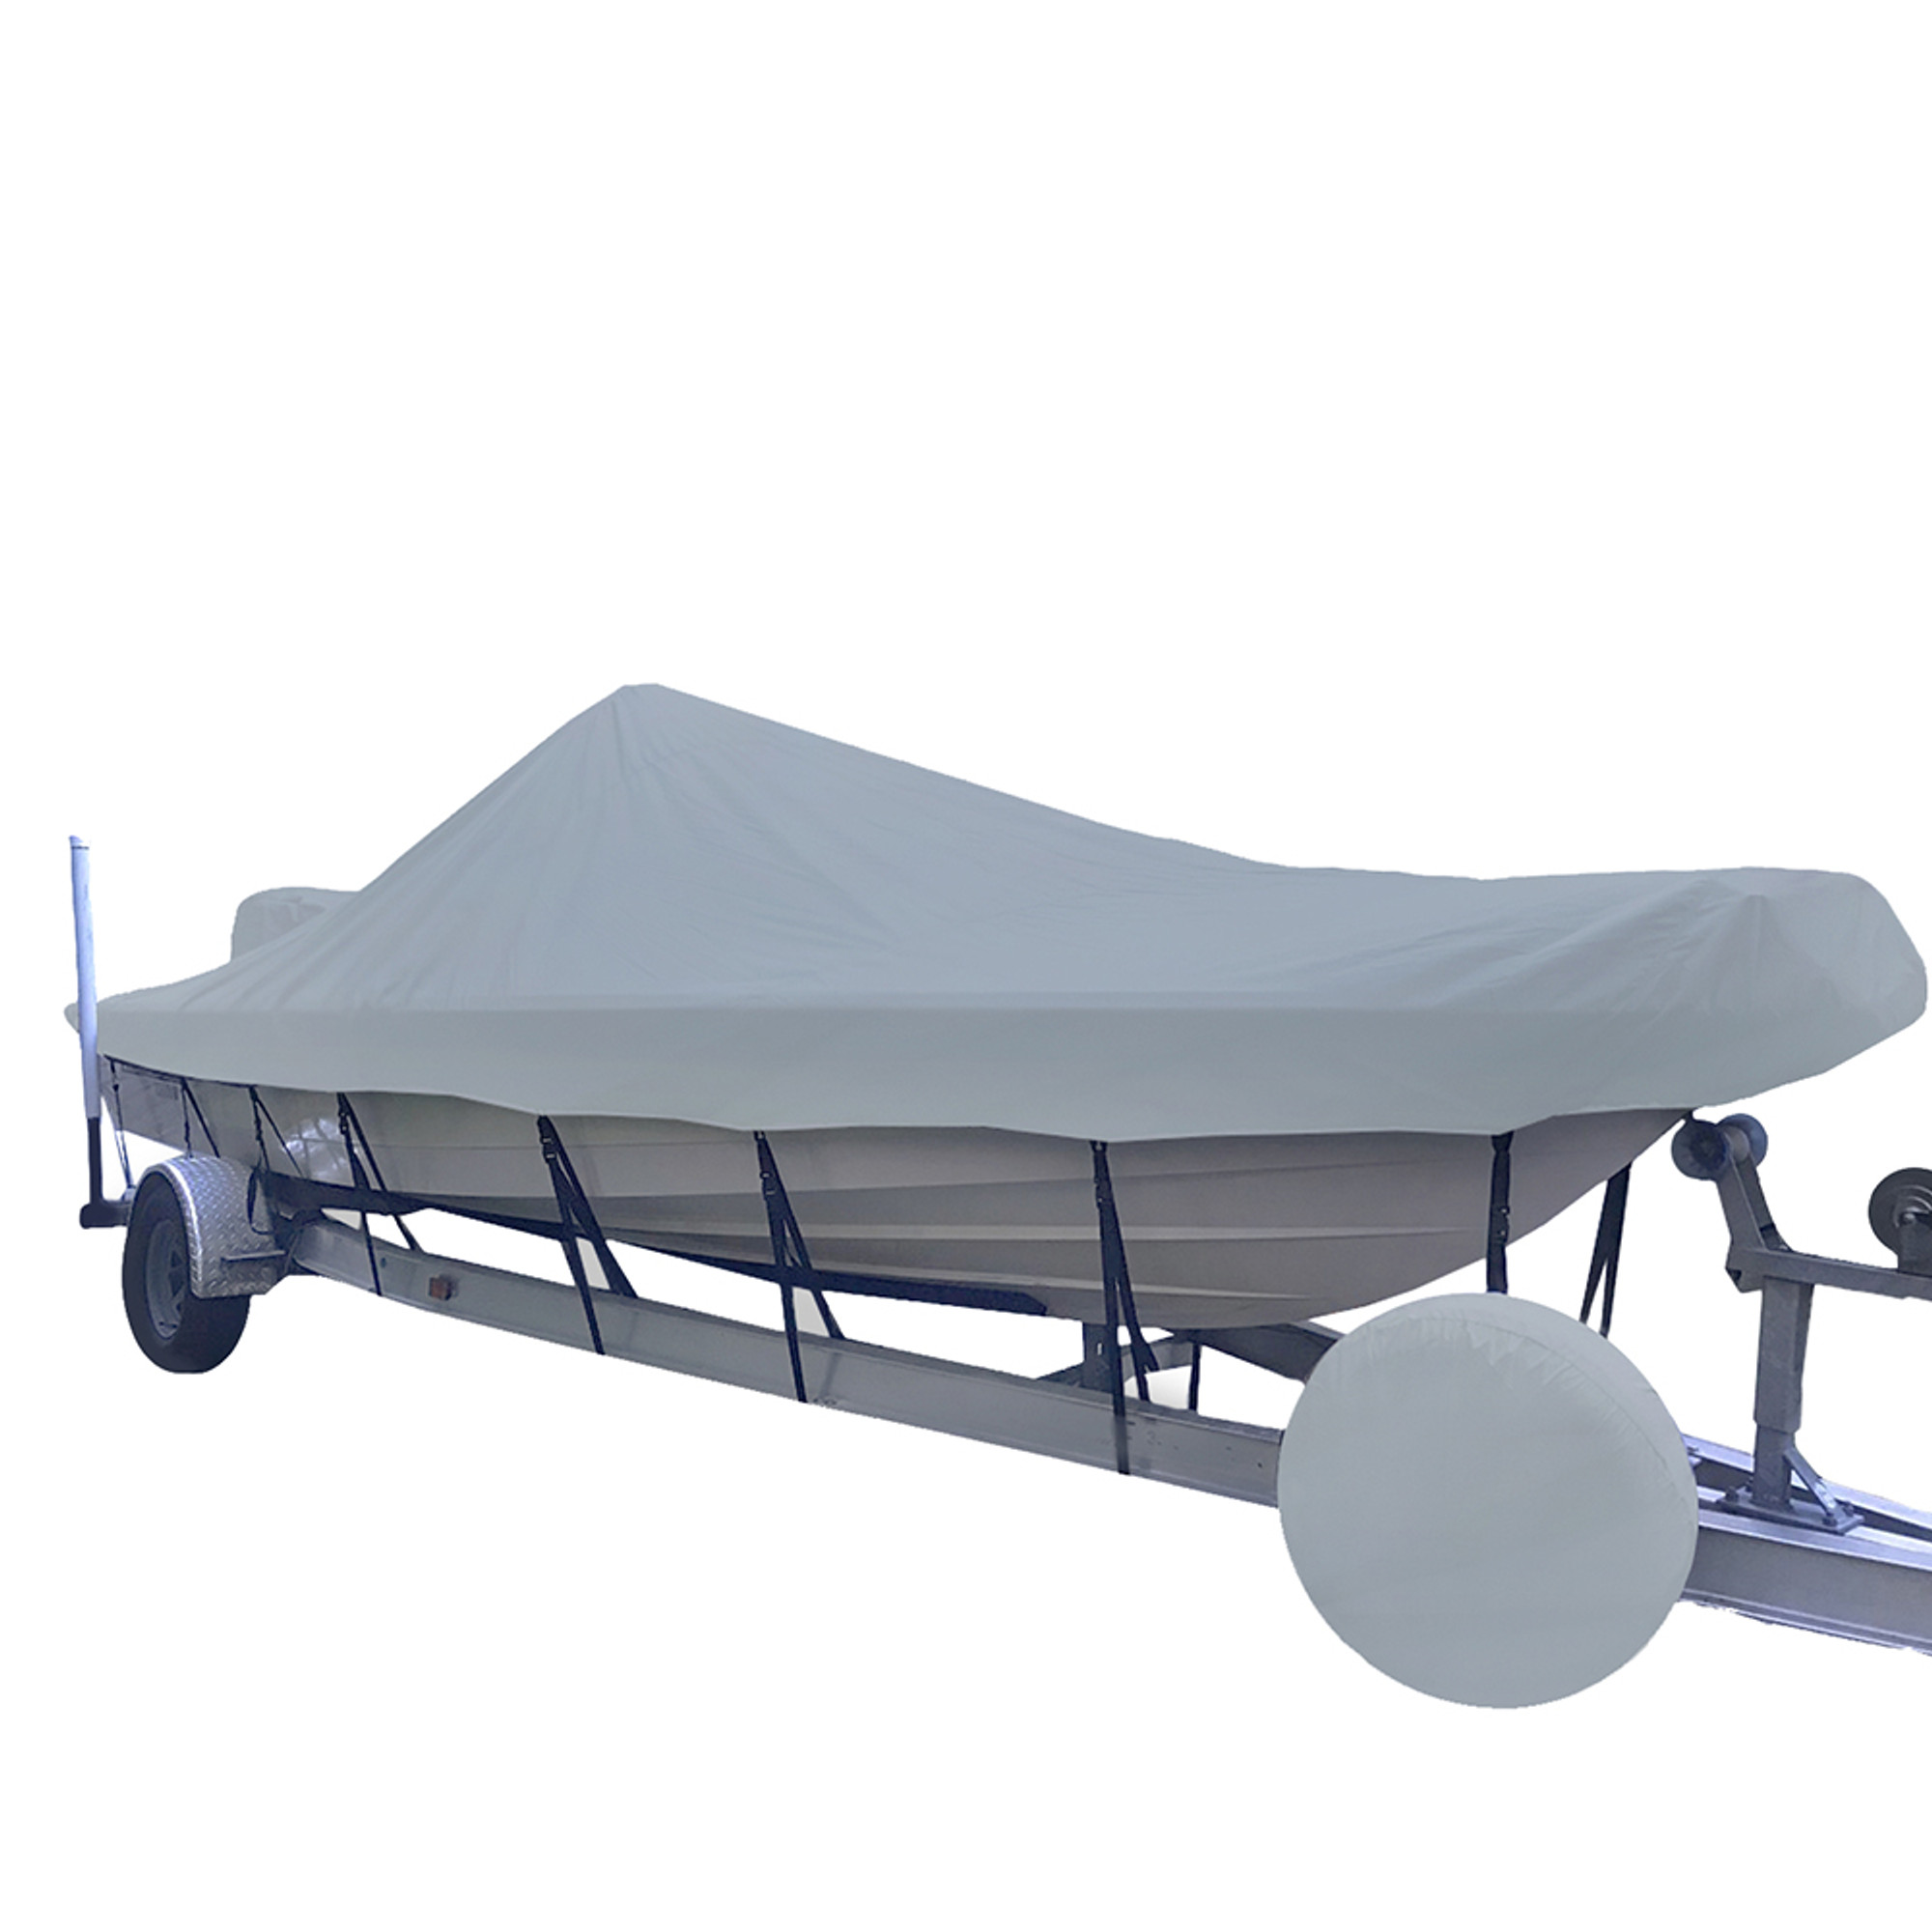 Carver Sun-DURA Narrow Series Styled-to-Fit Boat Cover f/23.5' V-Hull Center Console Shallow Draft Boats - Grey